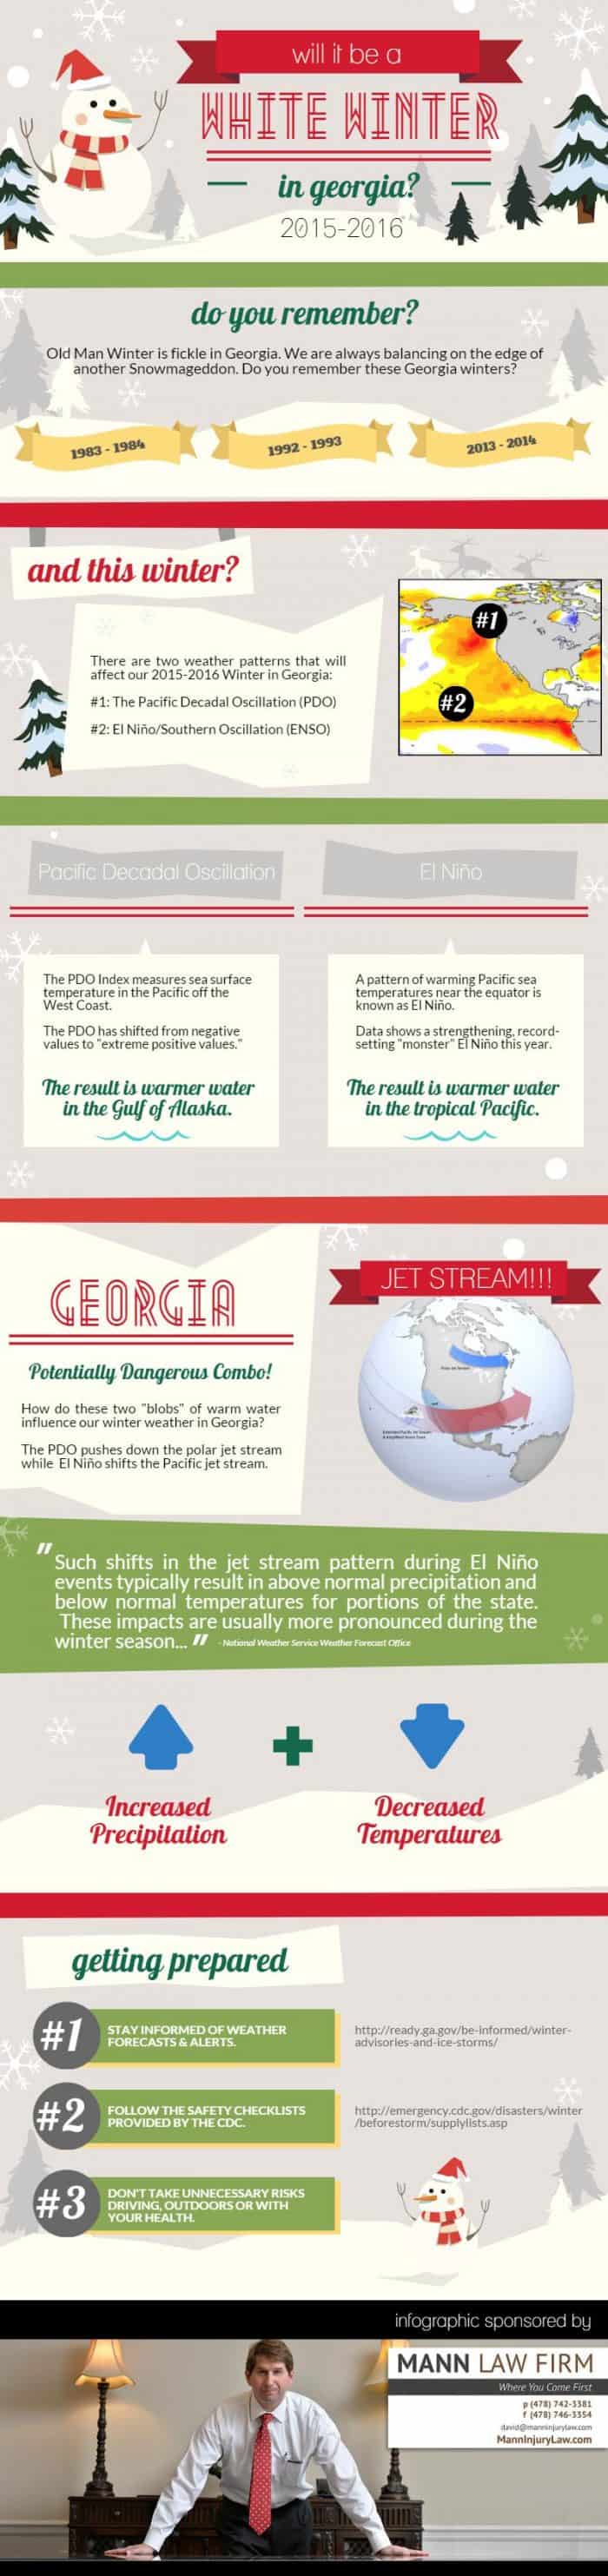 Winter Weather In Georgia Infographic